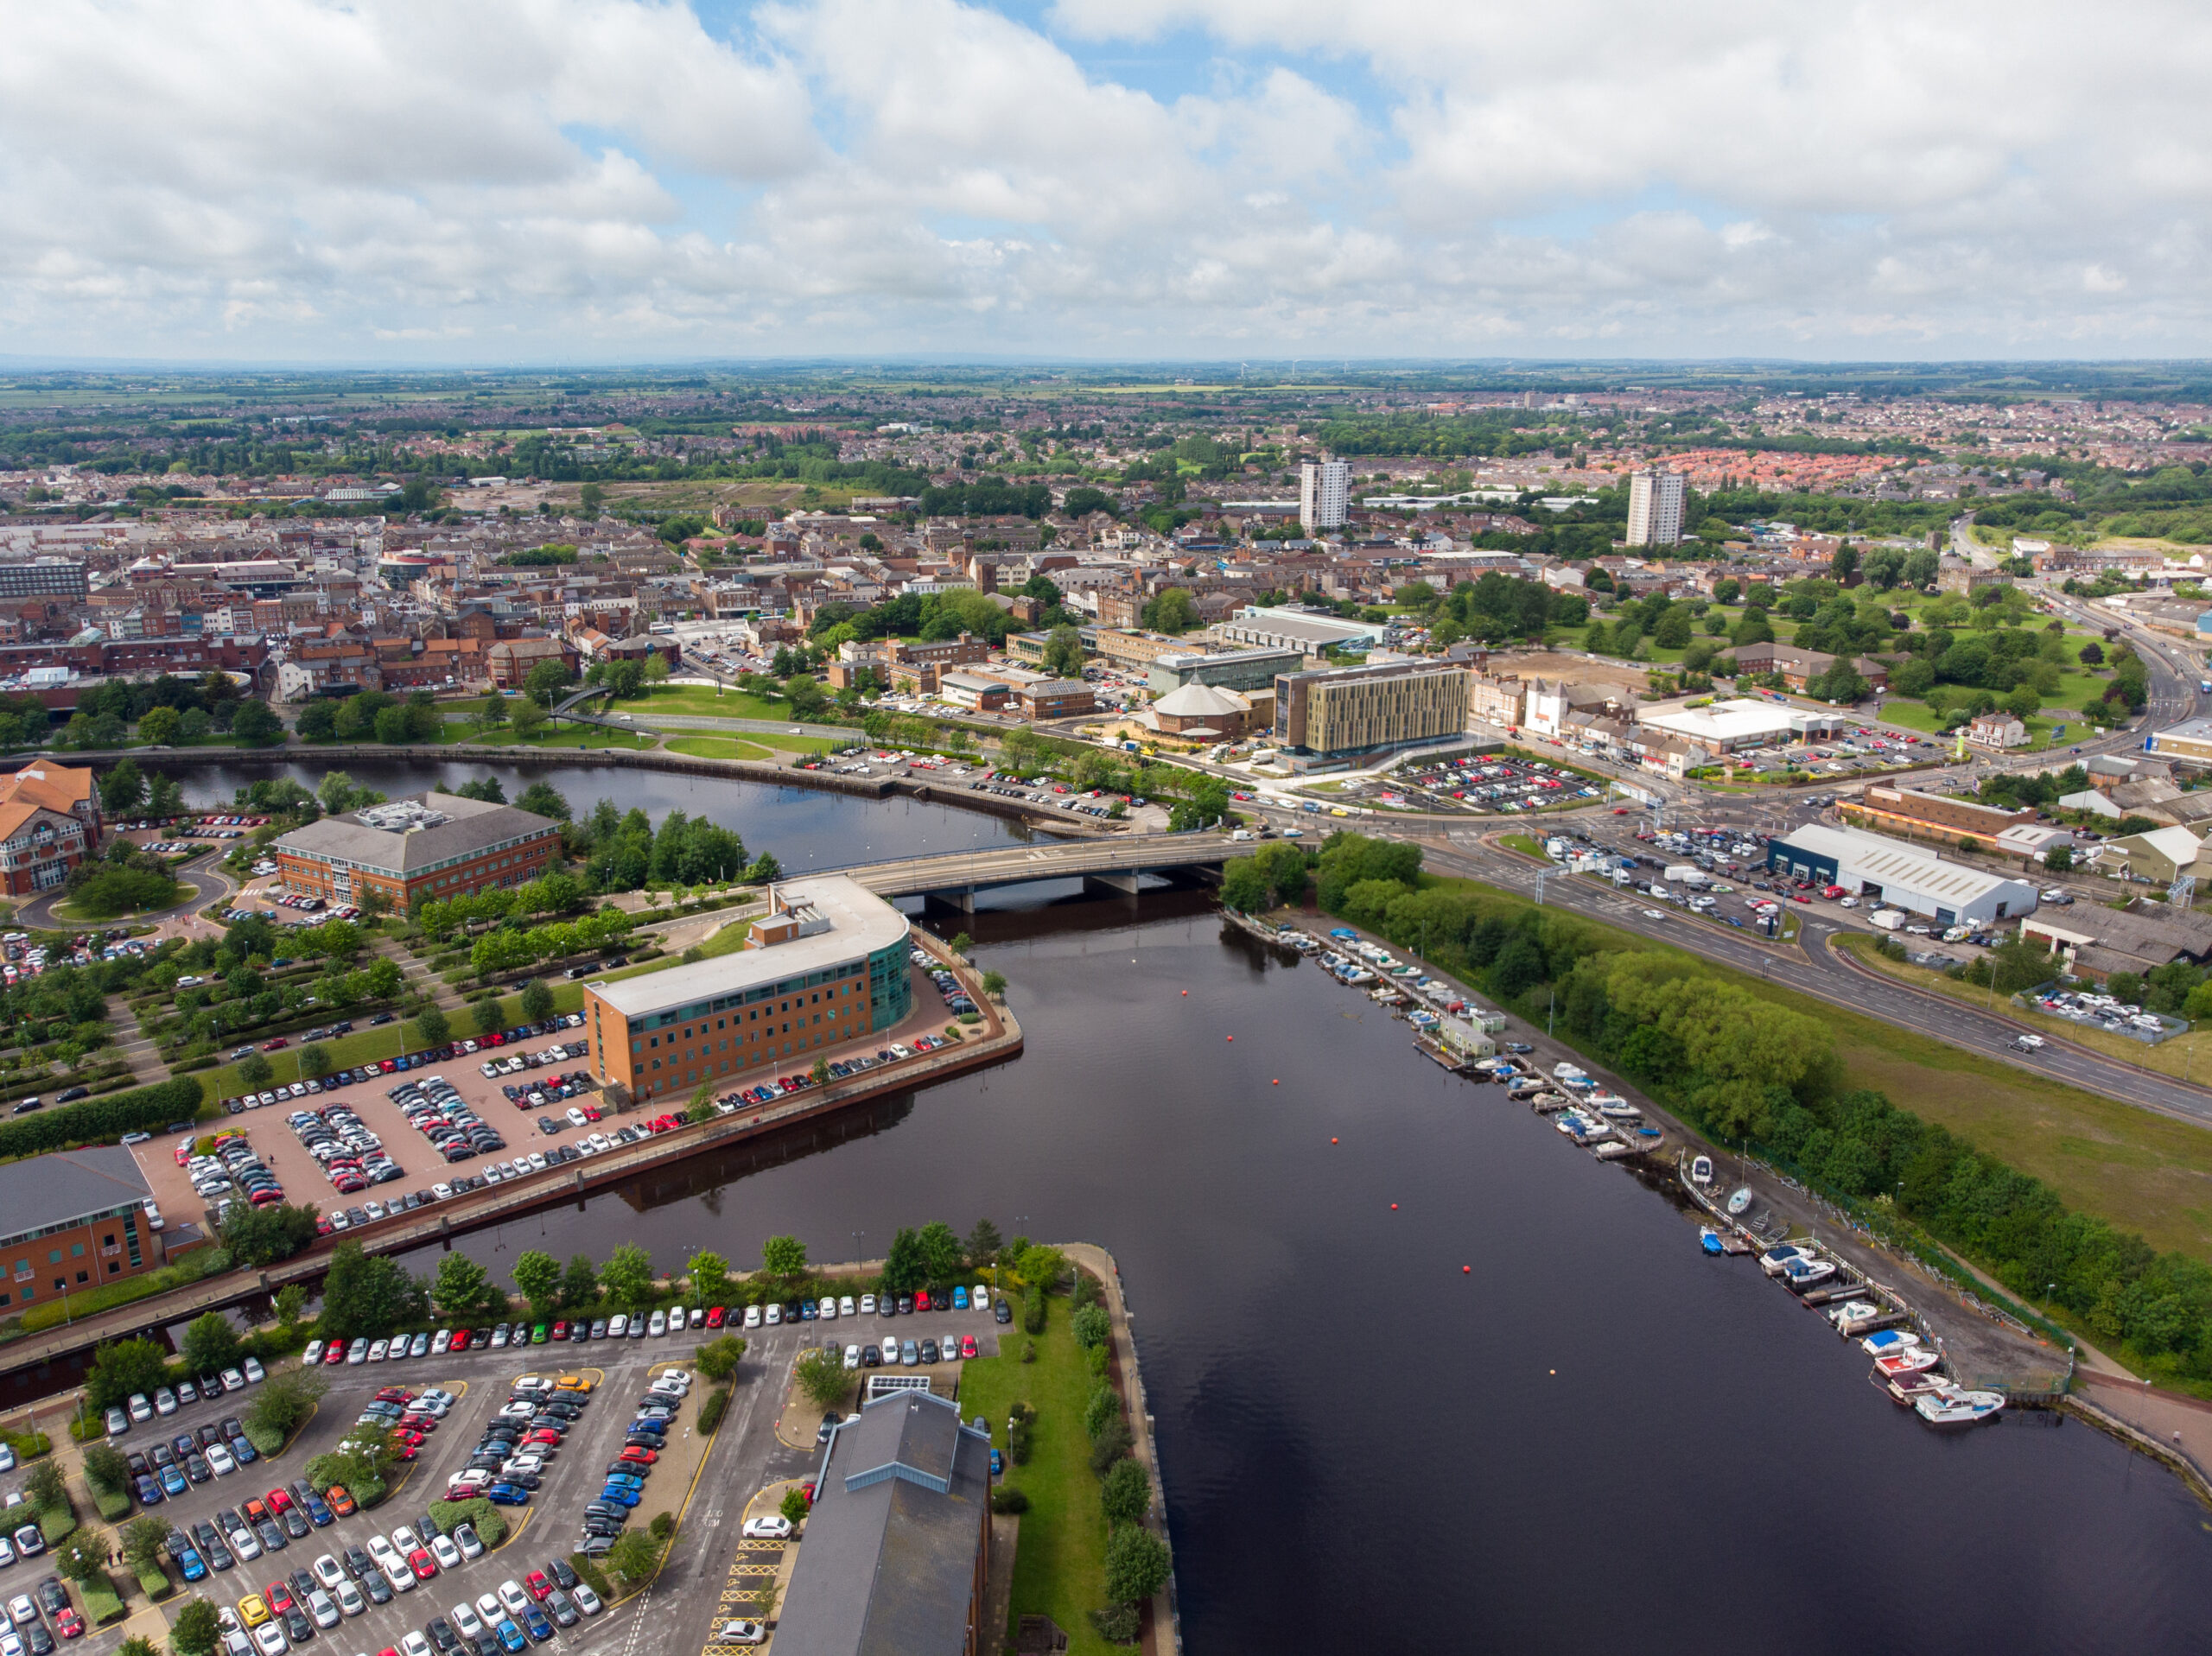 Aerial photo of the River Tee in Middlesbrough a large post-industrial town in the county of North Yorkshire, England, taken on a bright sunny day